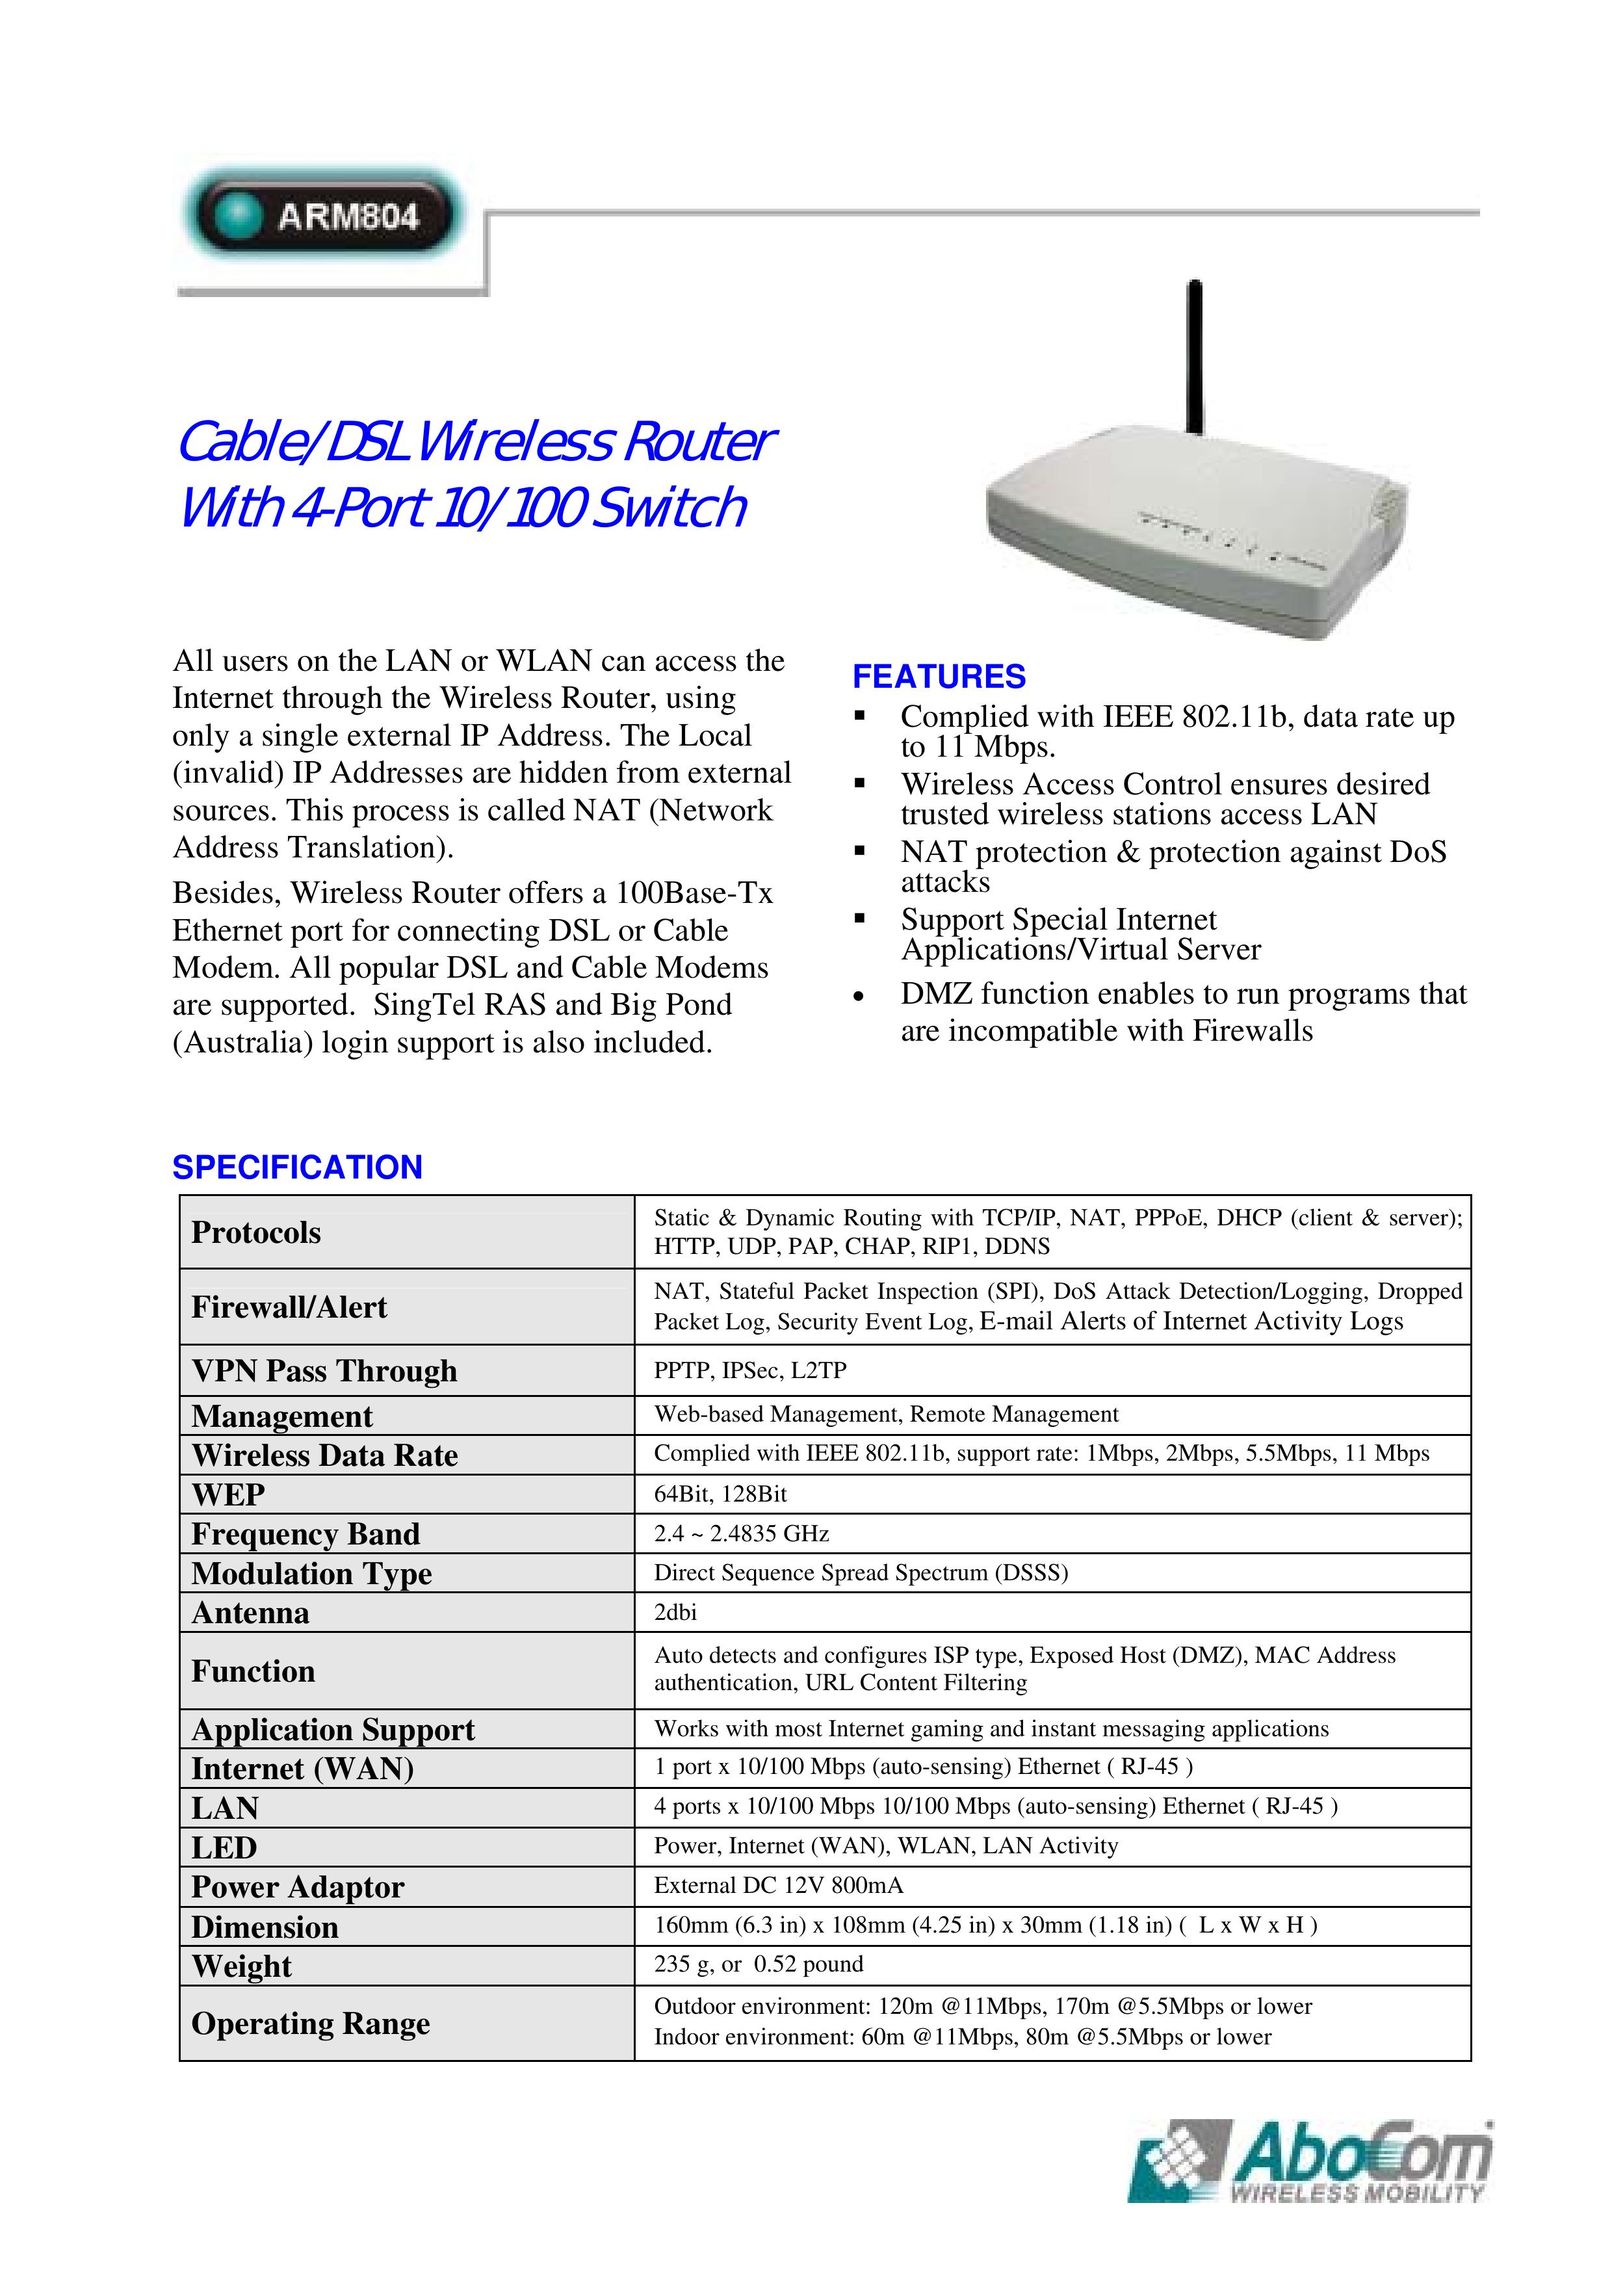 Abocom ARM804 Network Router User Manual